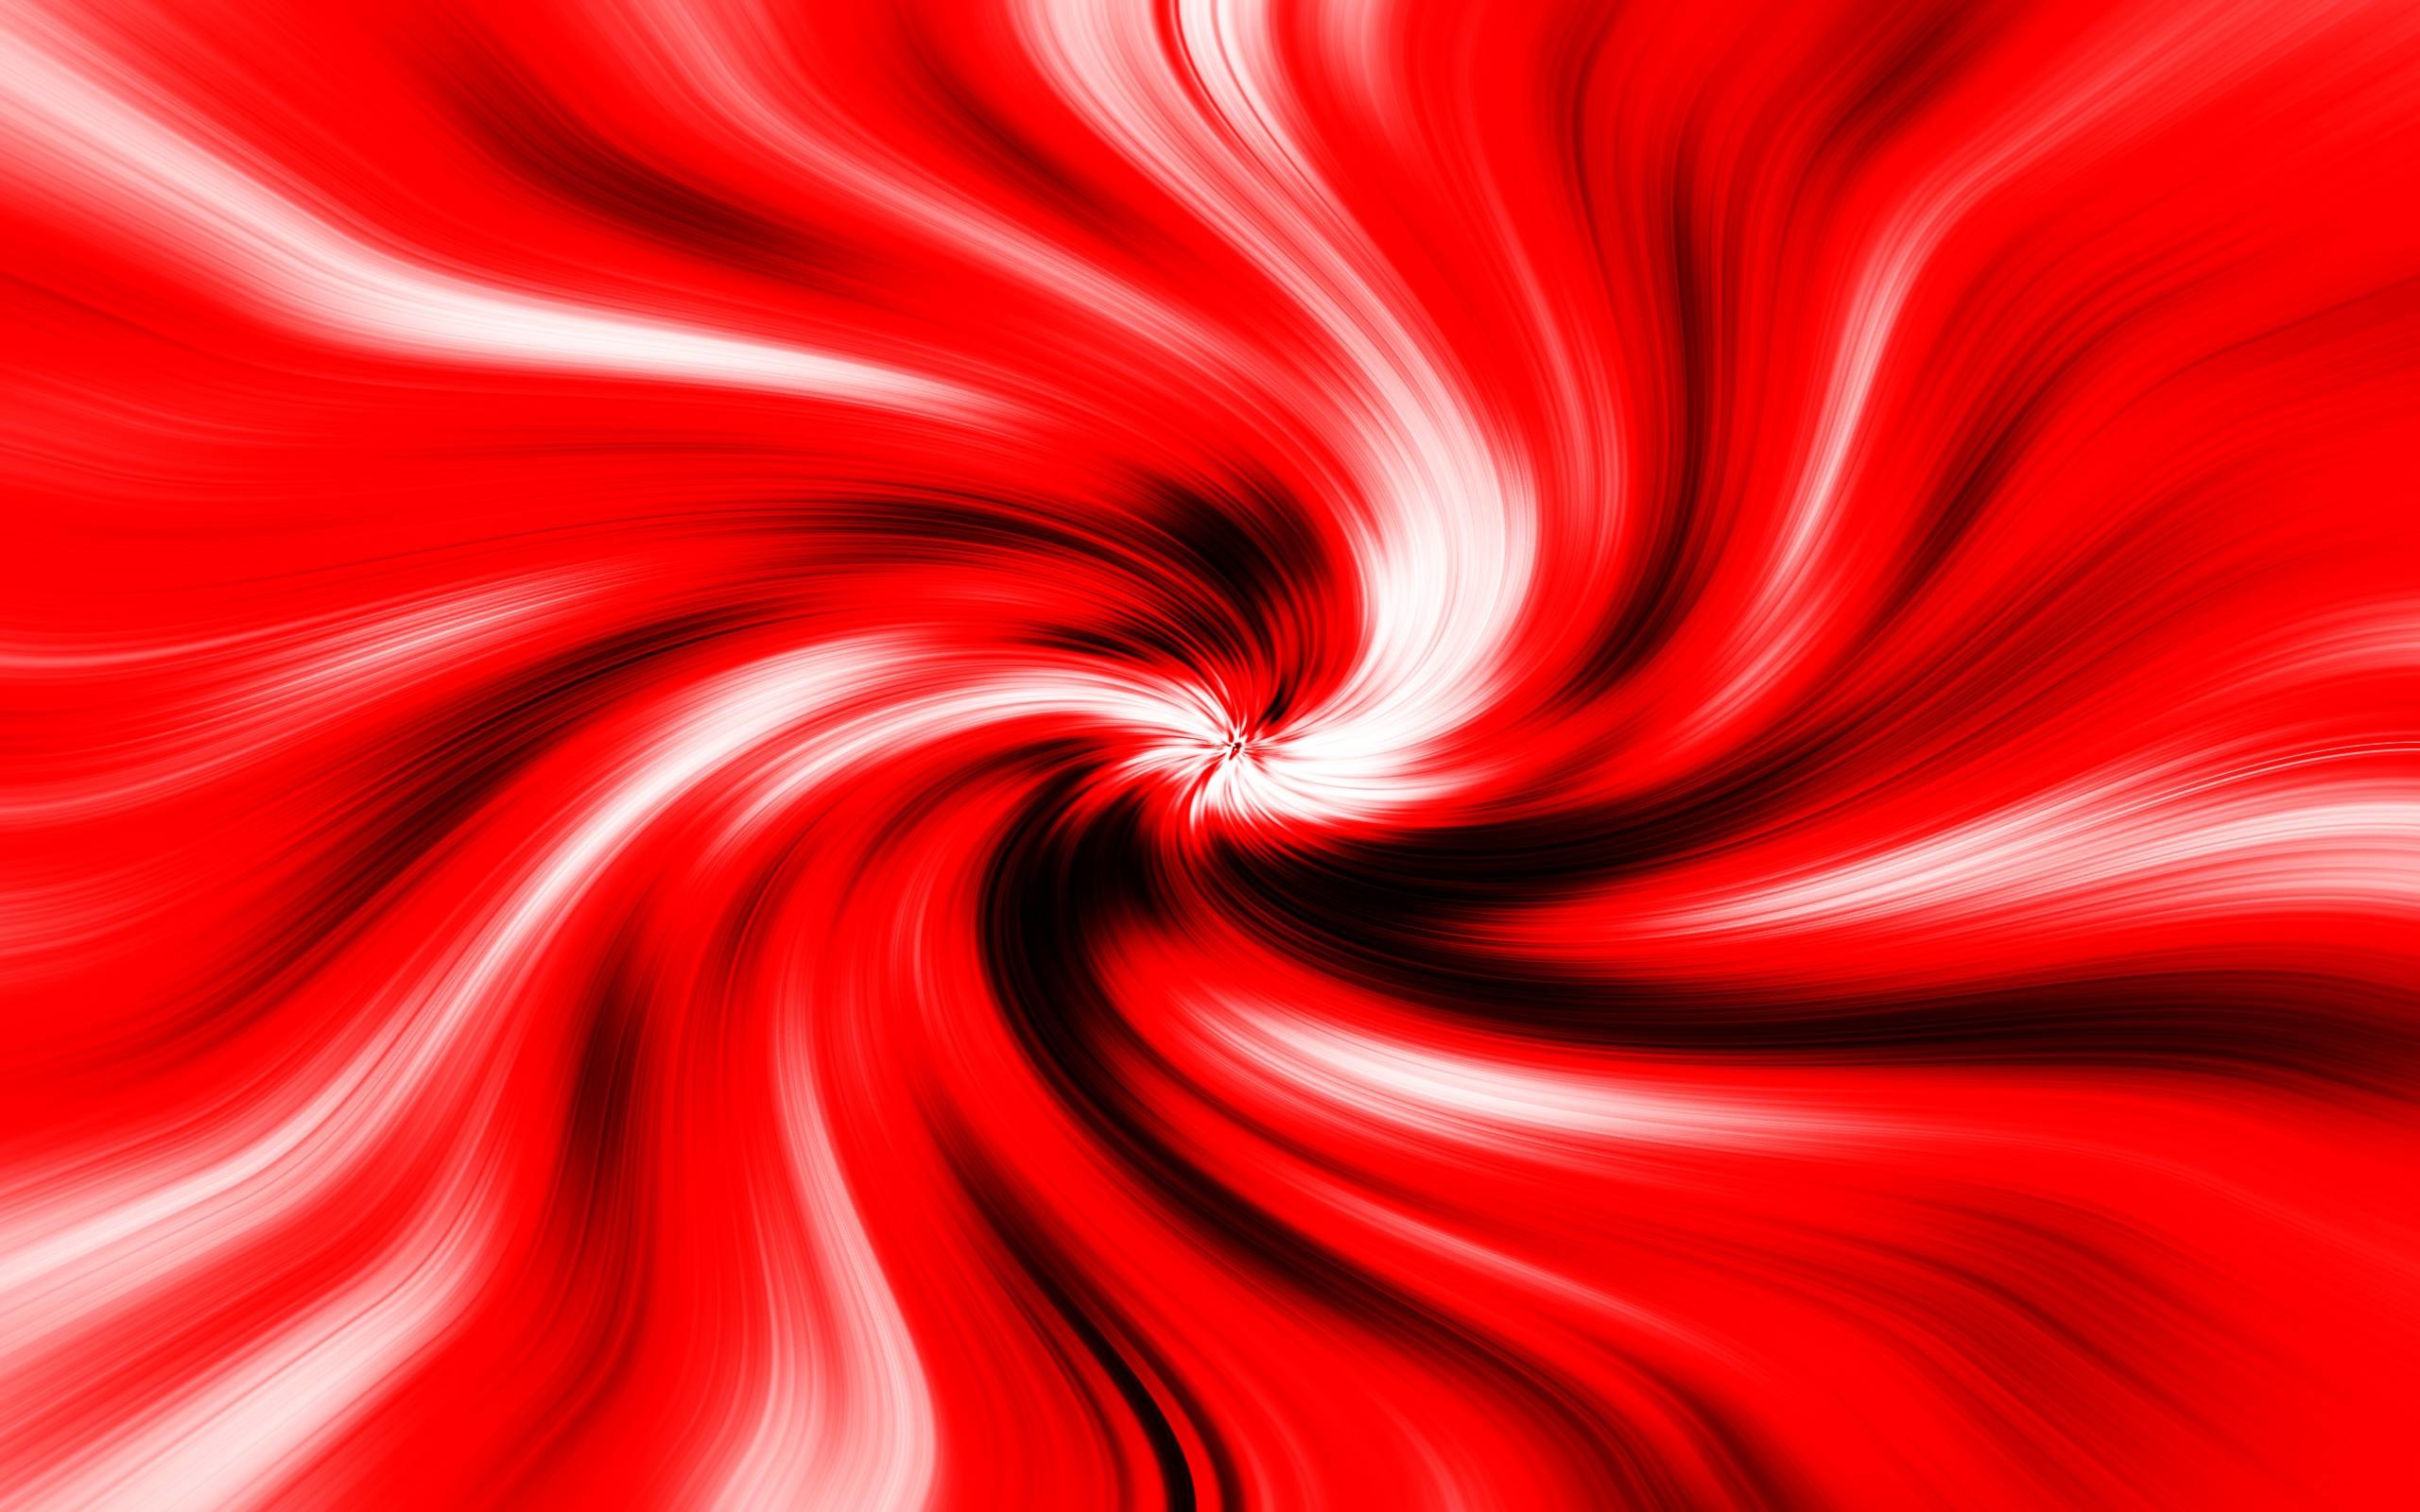 Red Black Swirl Wallpaper Px Free Download - Red And Black Swirl Background - HD Wallpaper 